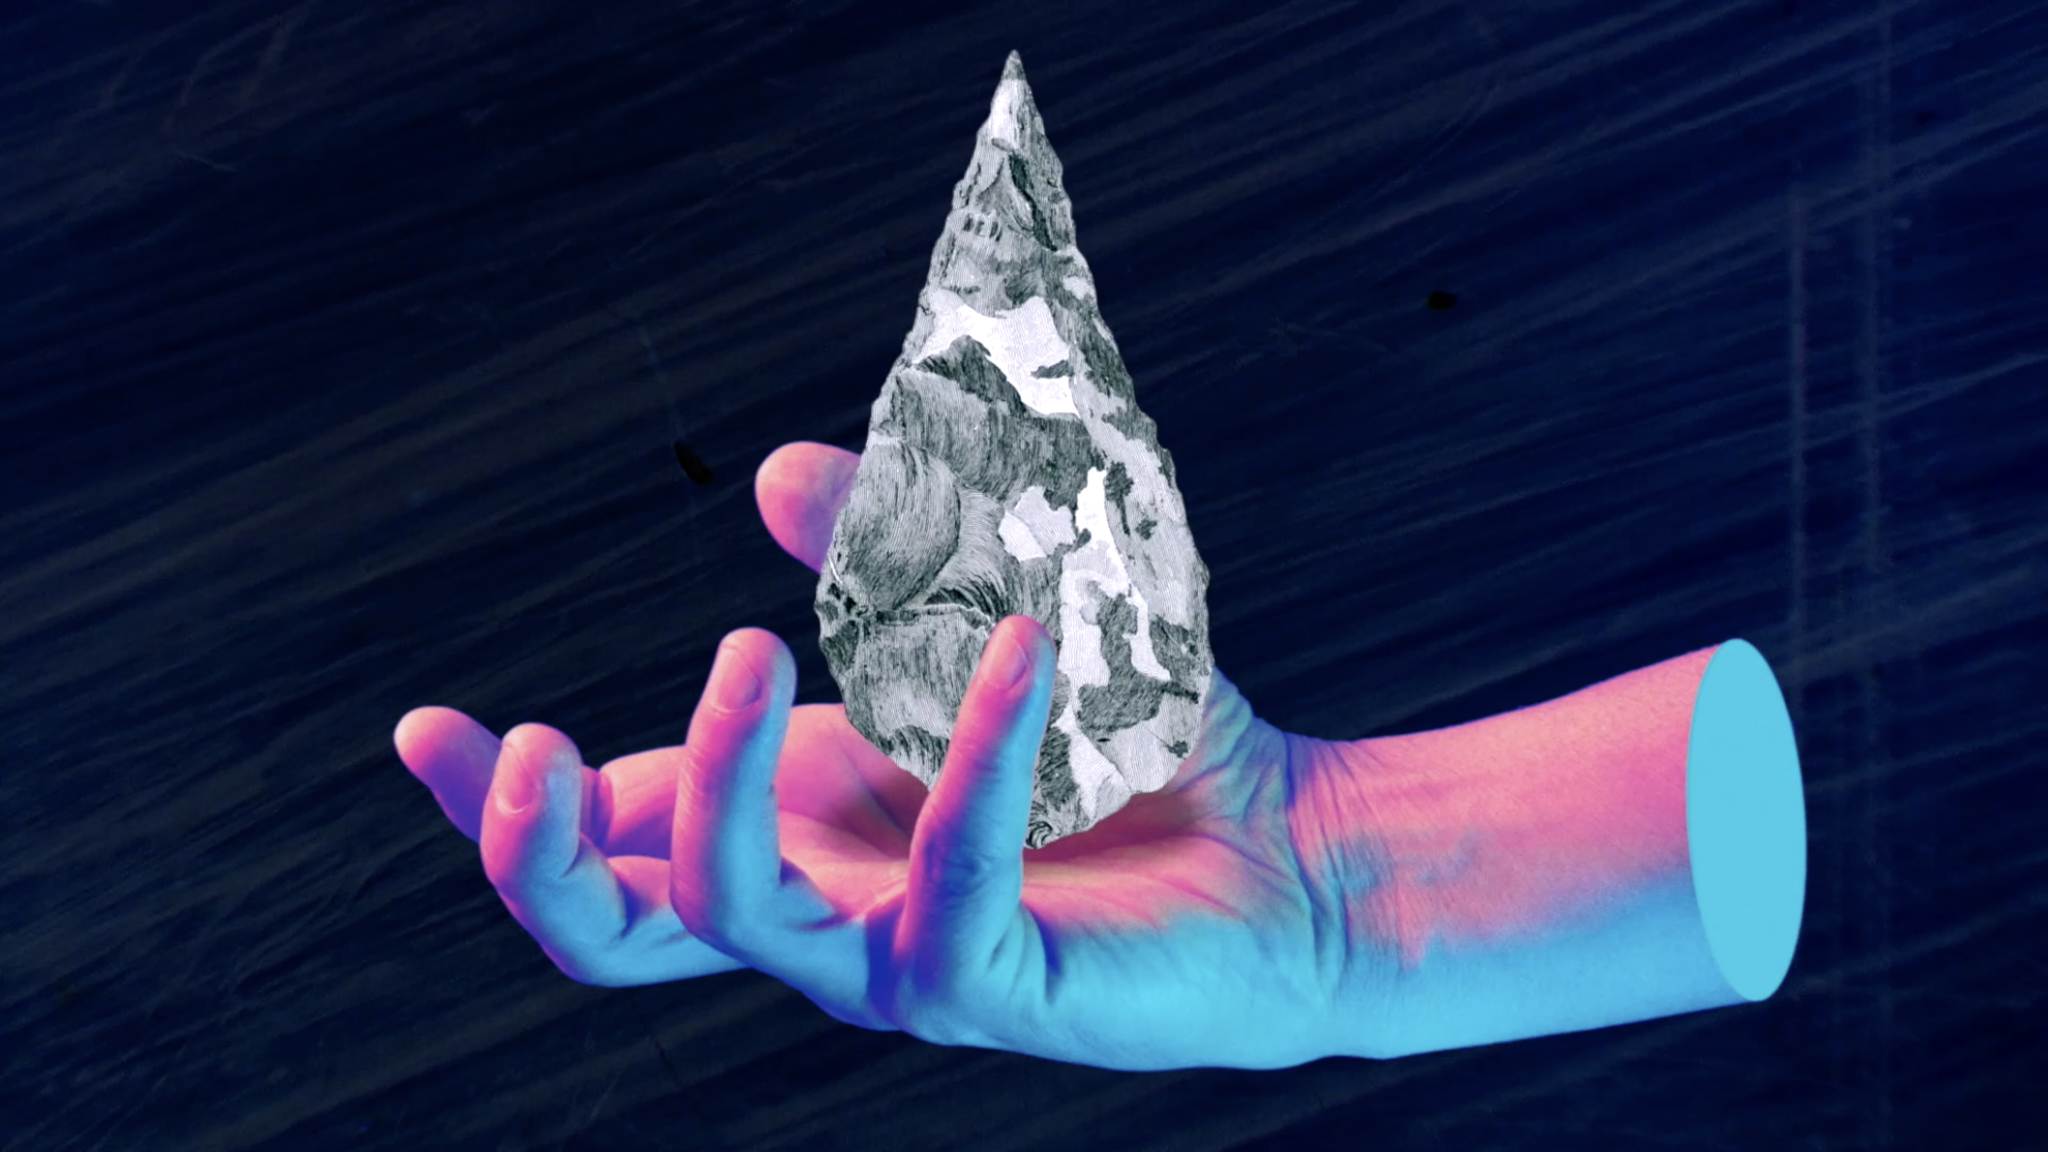 A disembodied hand clutches a piece of flint.